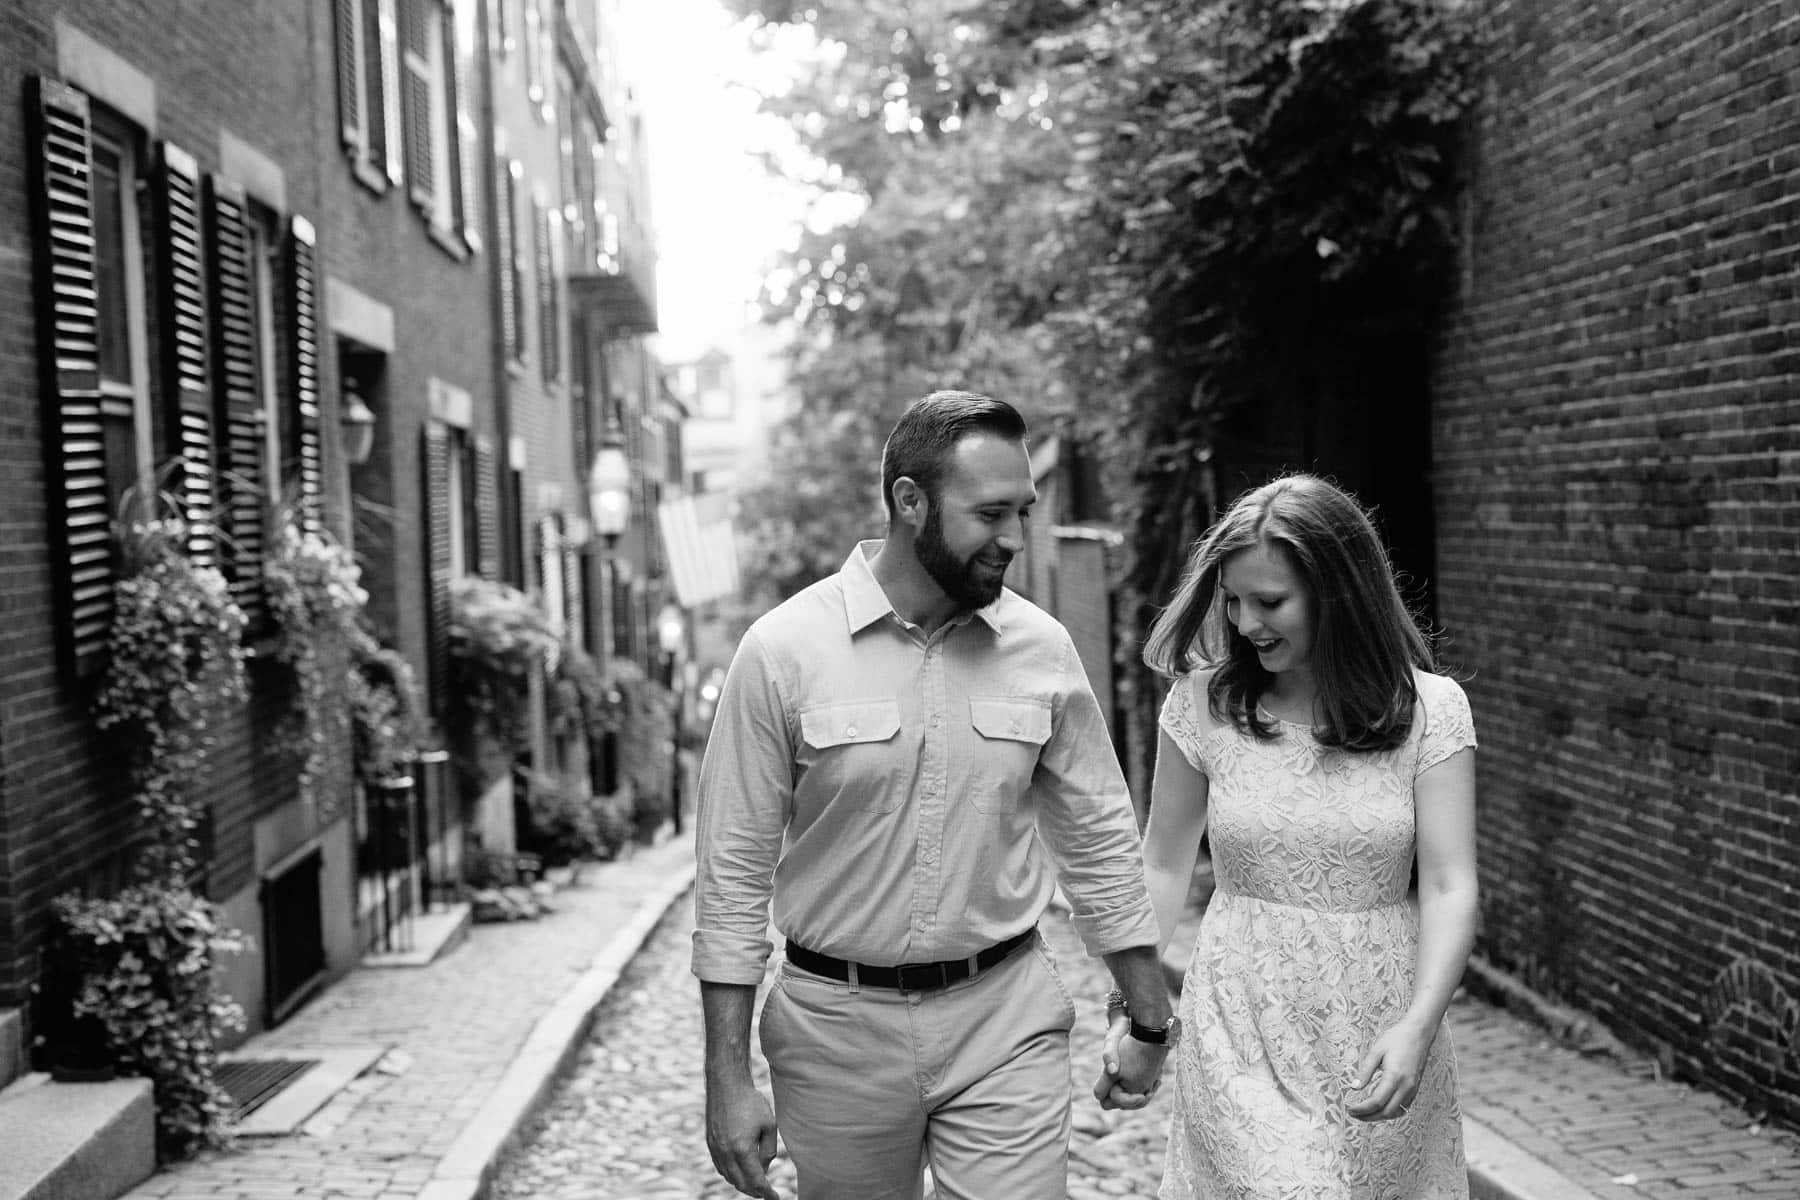 Peggy and Anthony's engagement photography session in Boston's Beacon Hill neighborhood | Kelly Benvenuto Photography | Boston Engagement Photographer